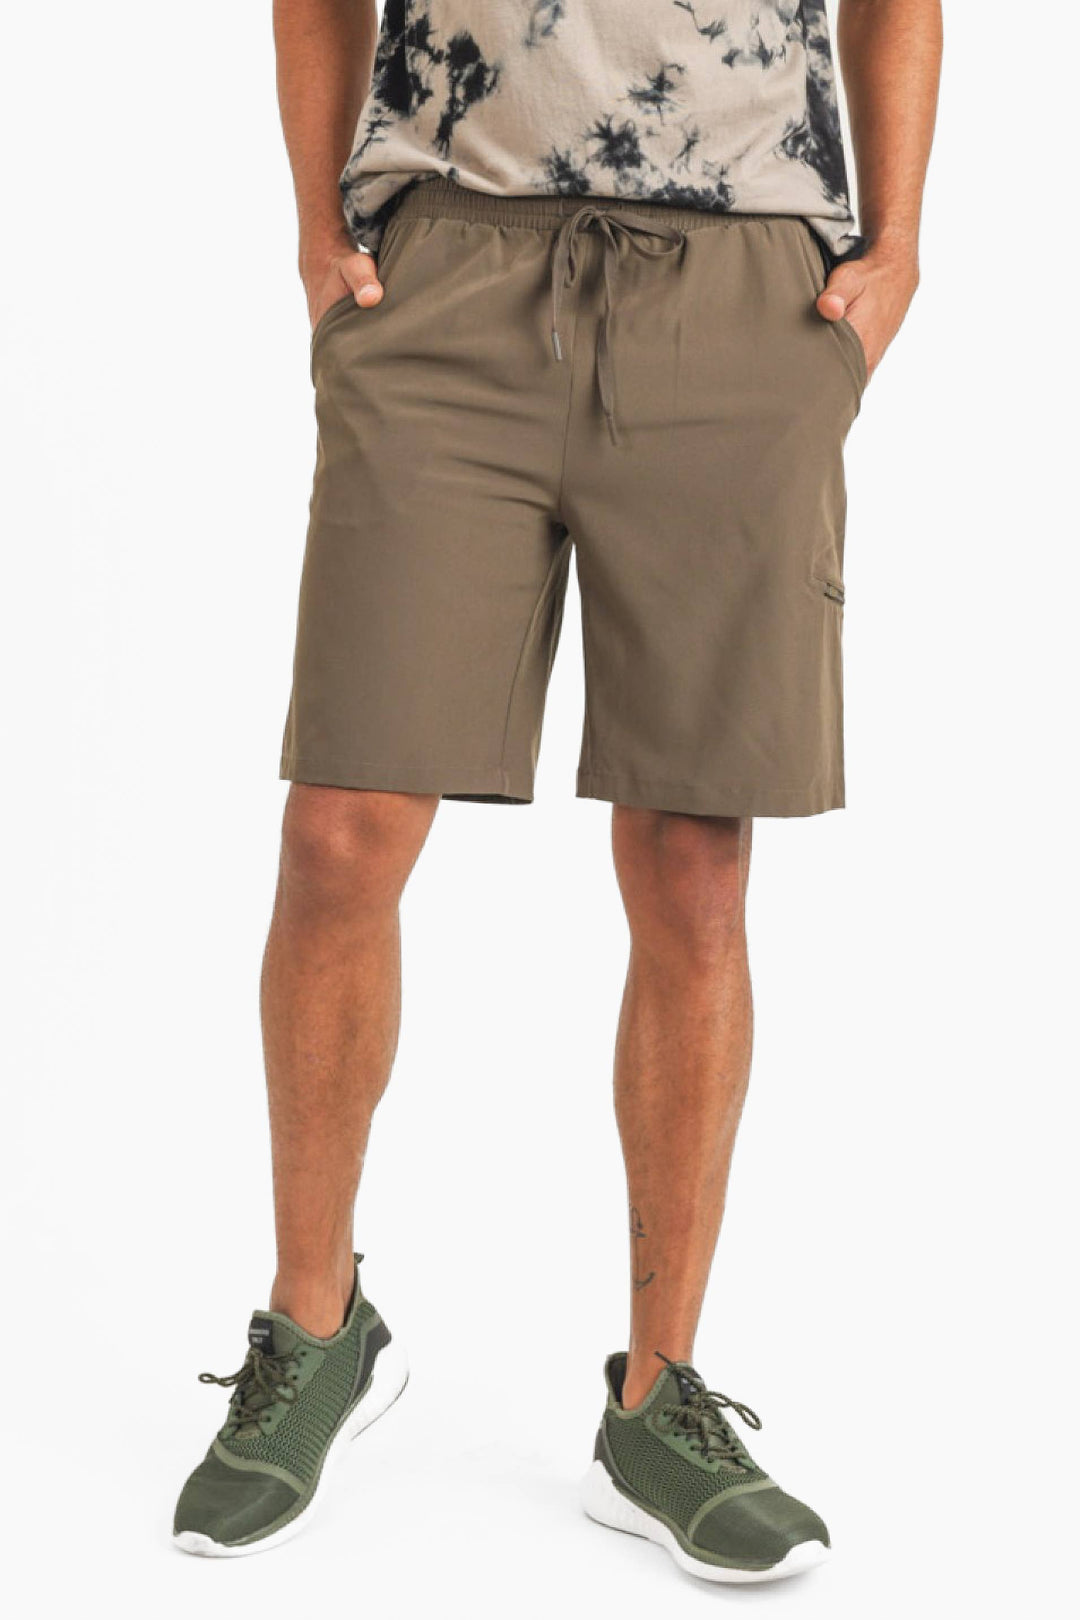 Mono B - MEN - Active Drawstring Shorts with Zippered Pouch